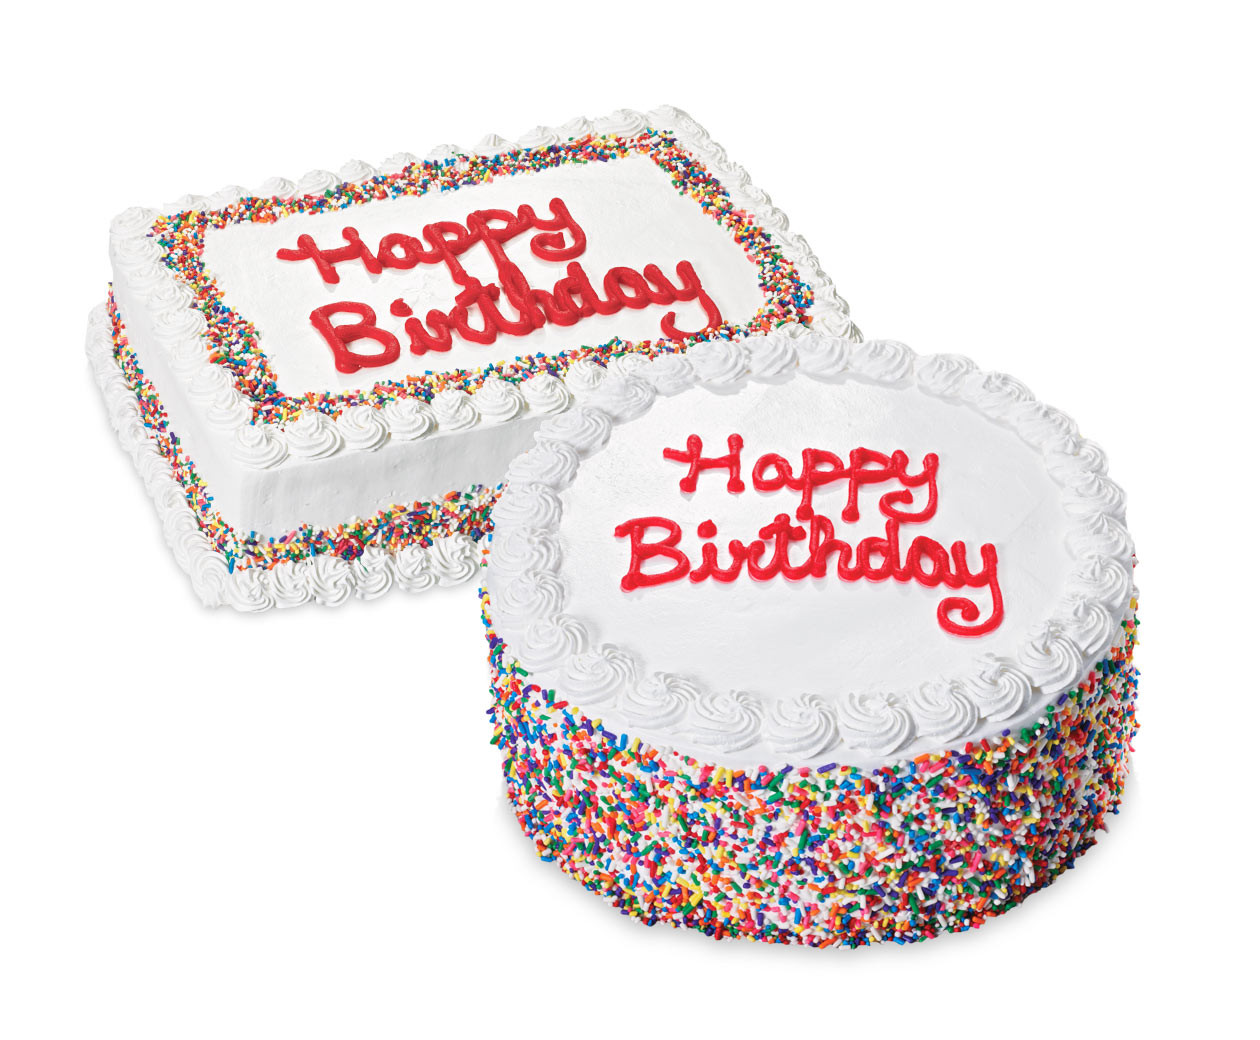 Cold Stone Birthday Cake
 Birthday Cakes made with your favorite Ice Cream at Cold